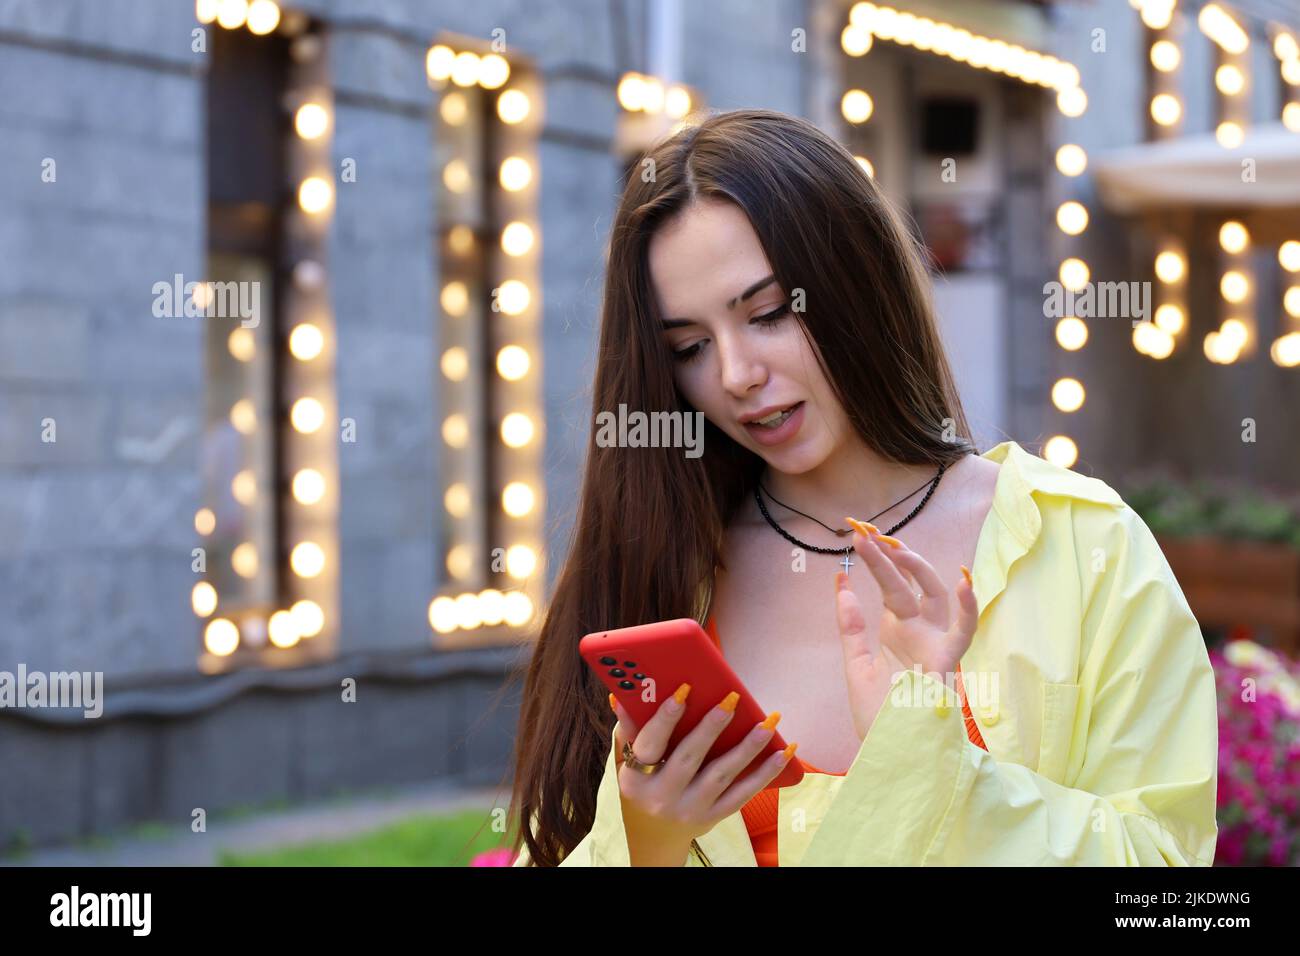 Happy attractive girl with long hair and perfect makeup using smartphone on a street on festive lights background. Female beauty, online communication Stock Photo